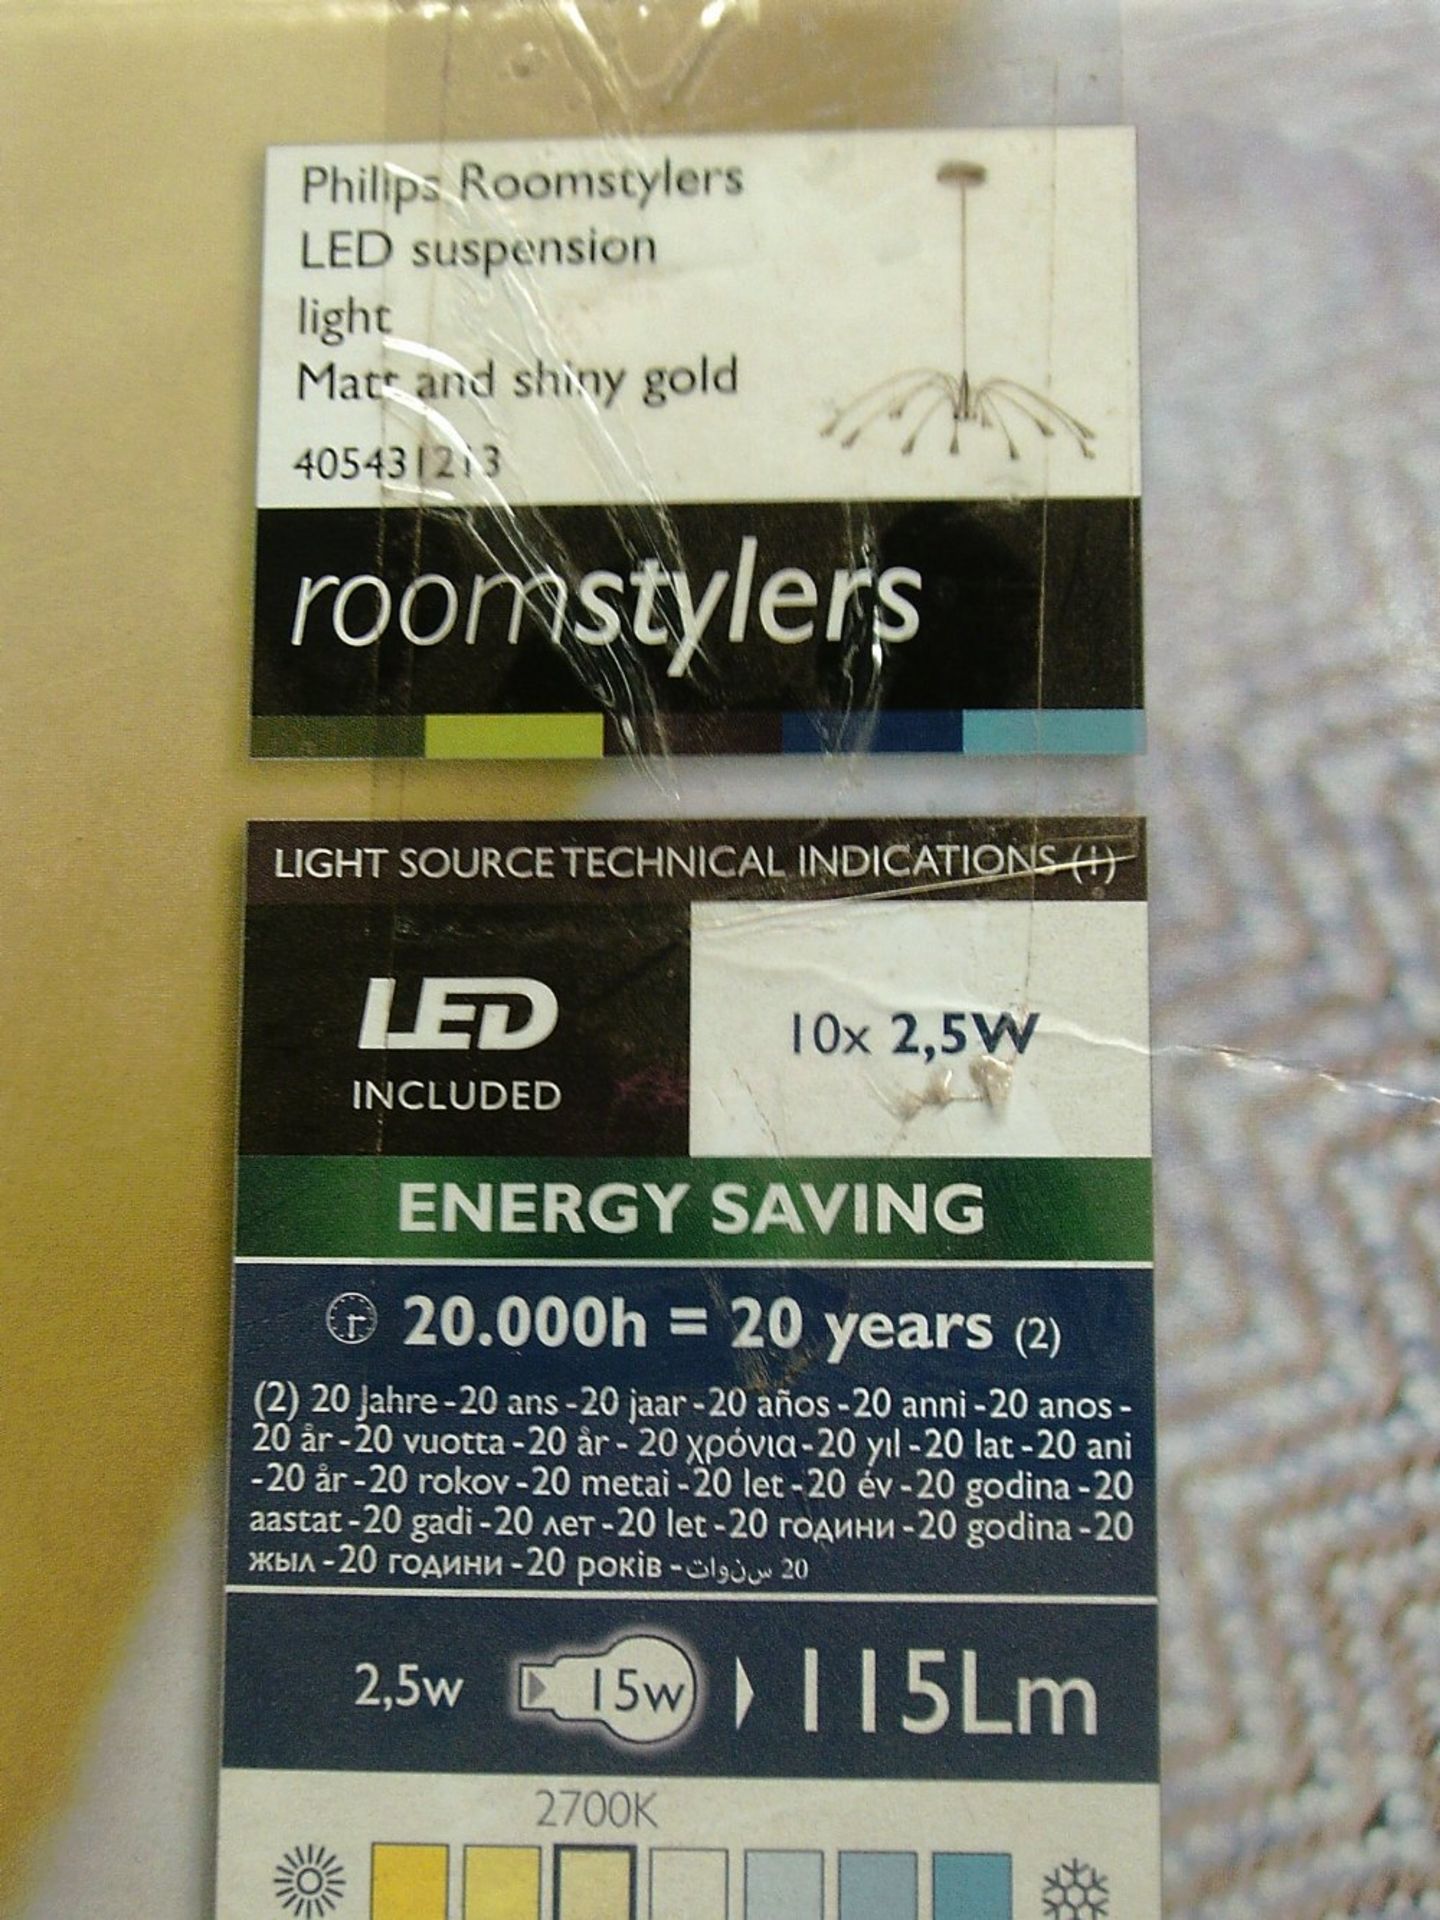 Philips roomstylers LED suspension light - brand new rrp £300 + - Image 3 of 4